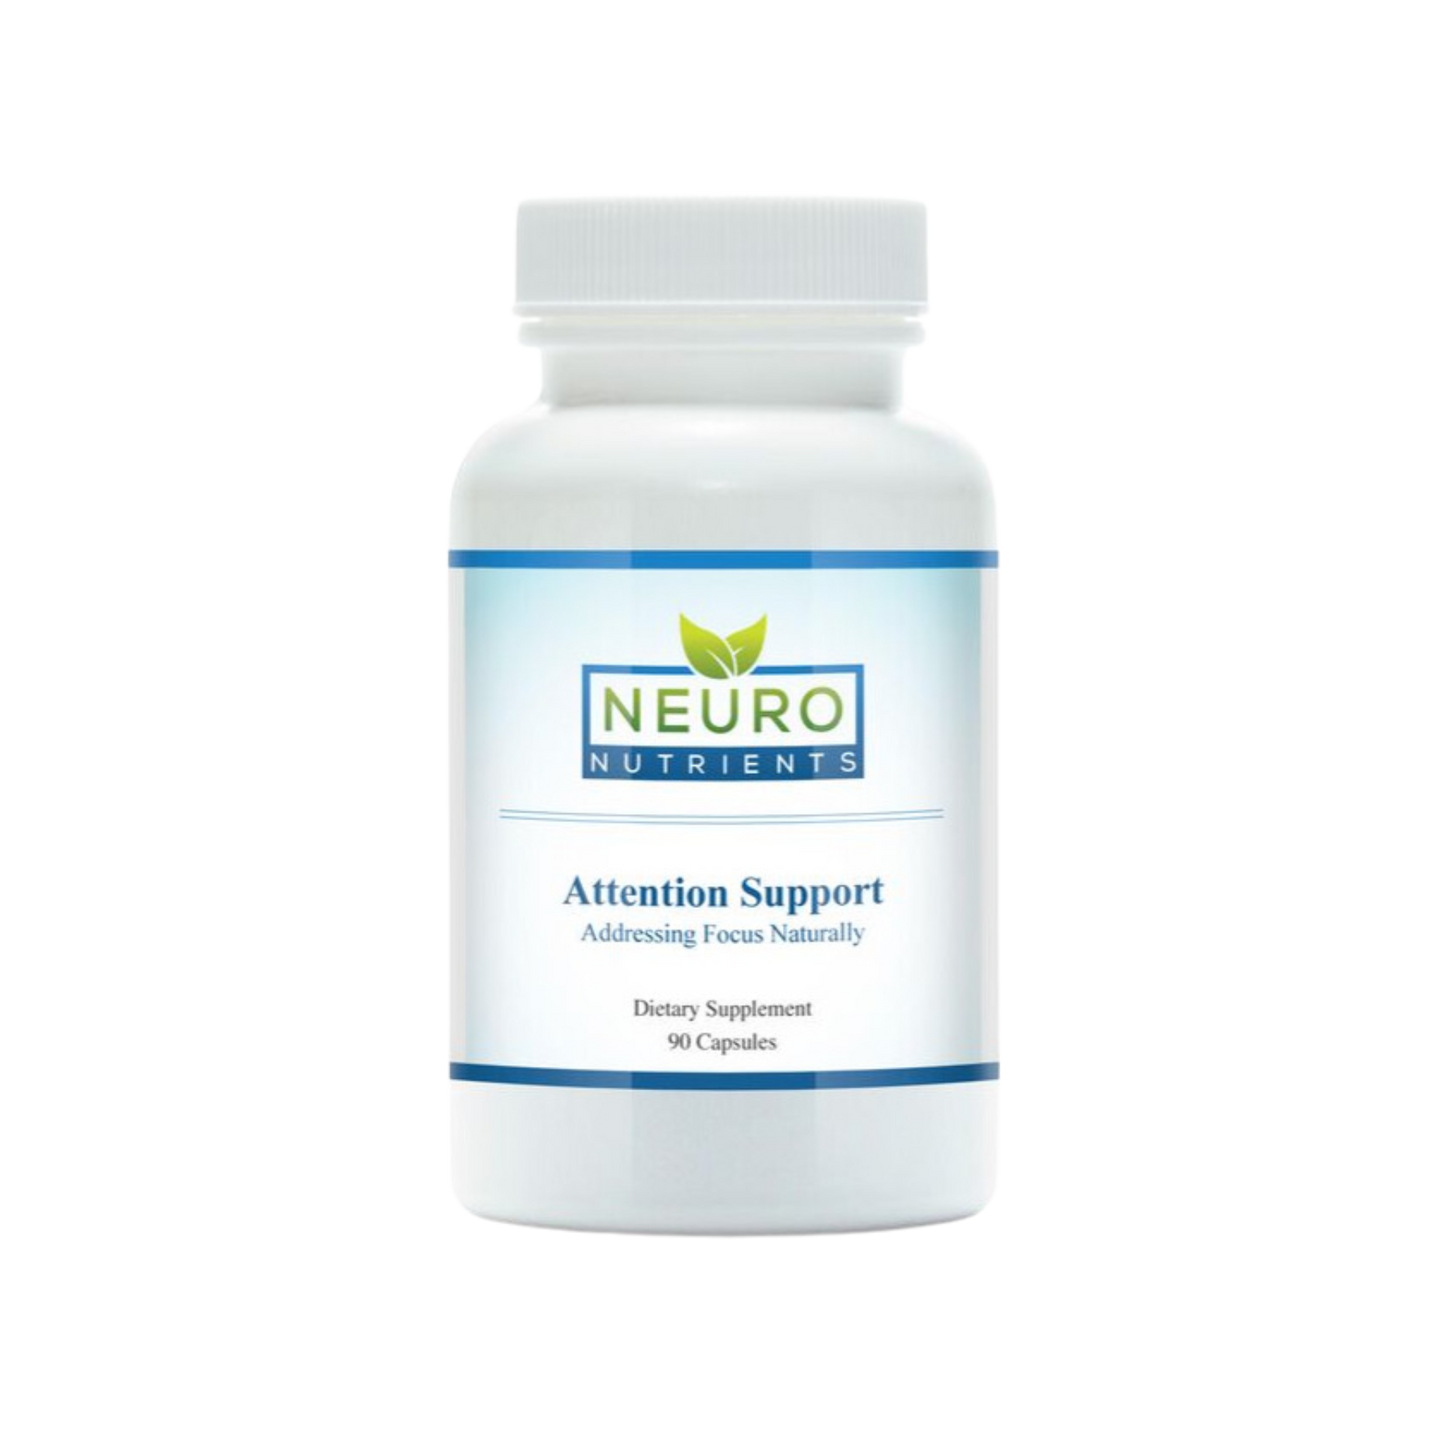 Neuro Nutrients Attention Support Capsules